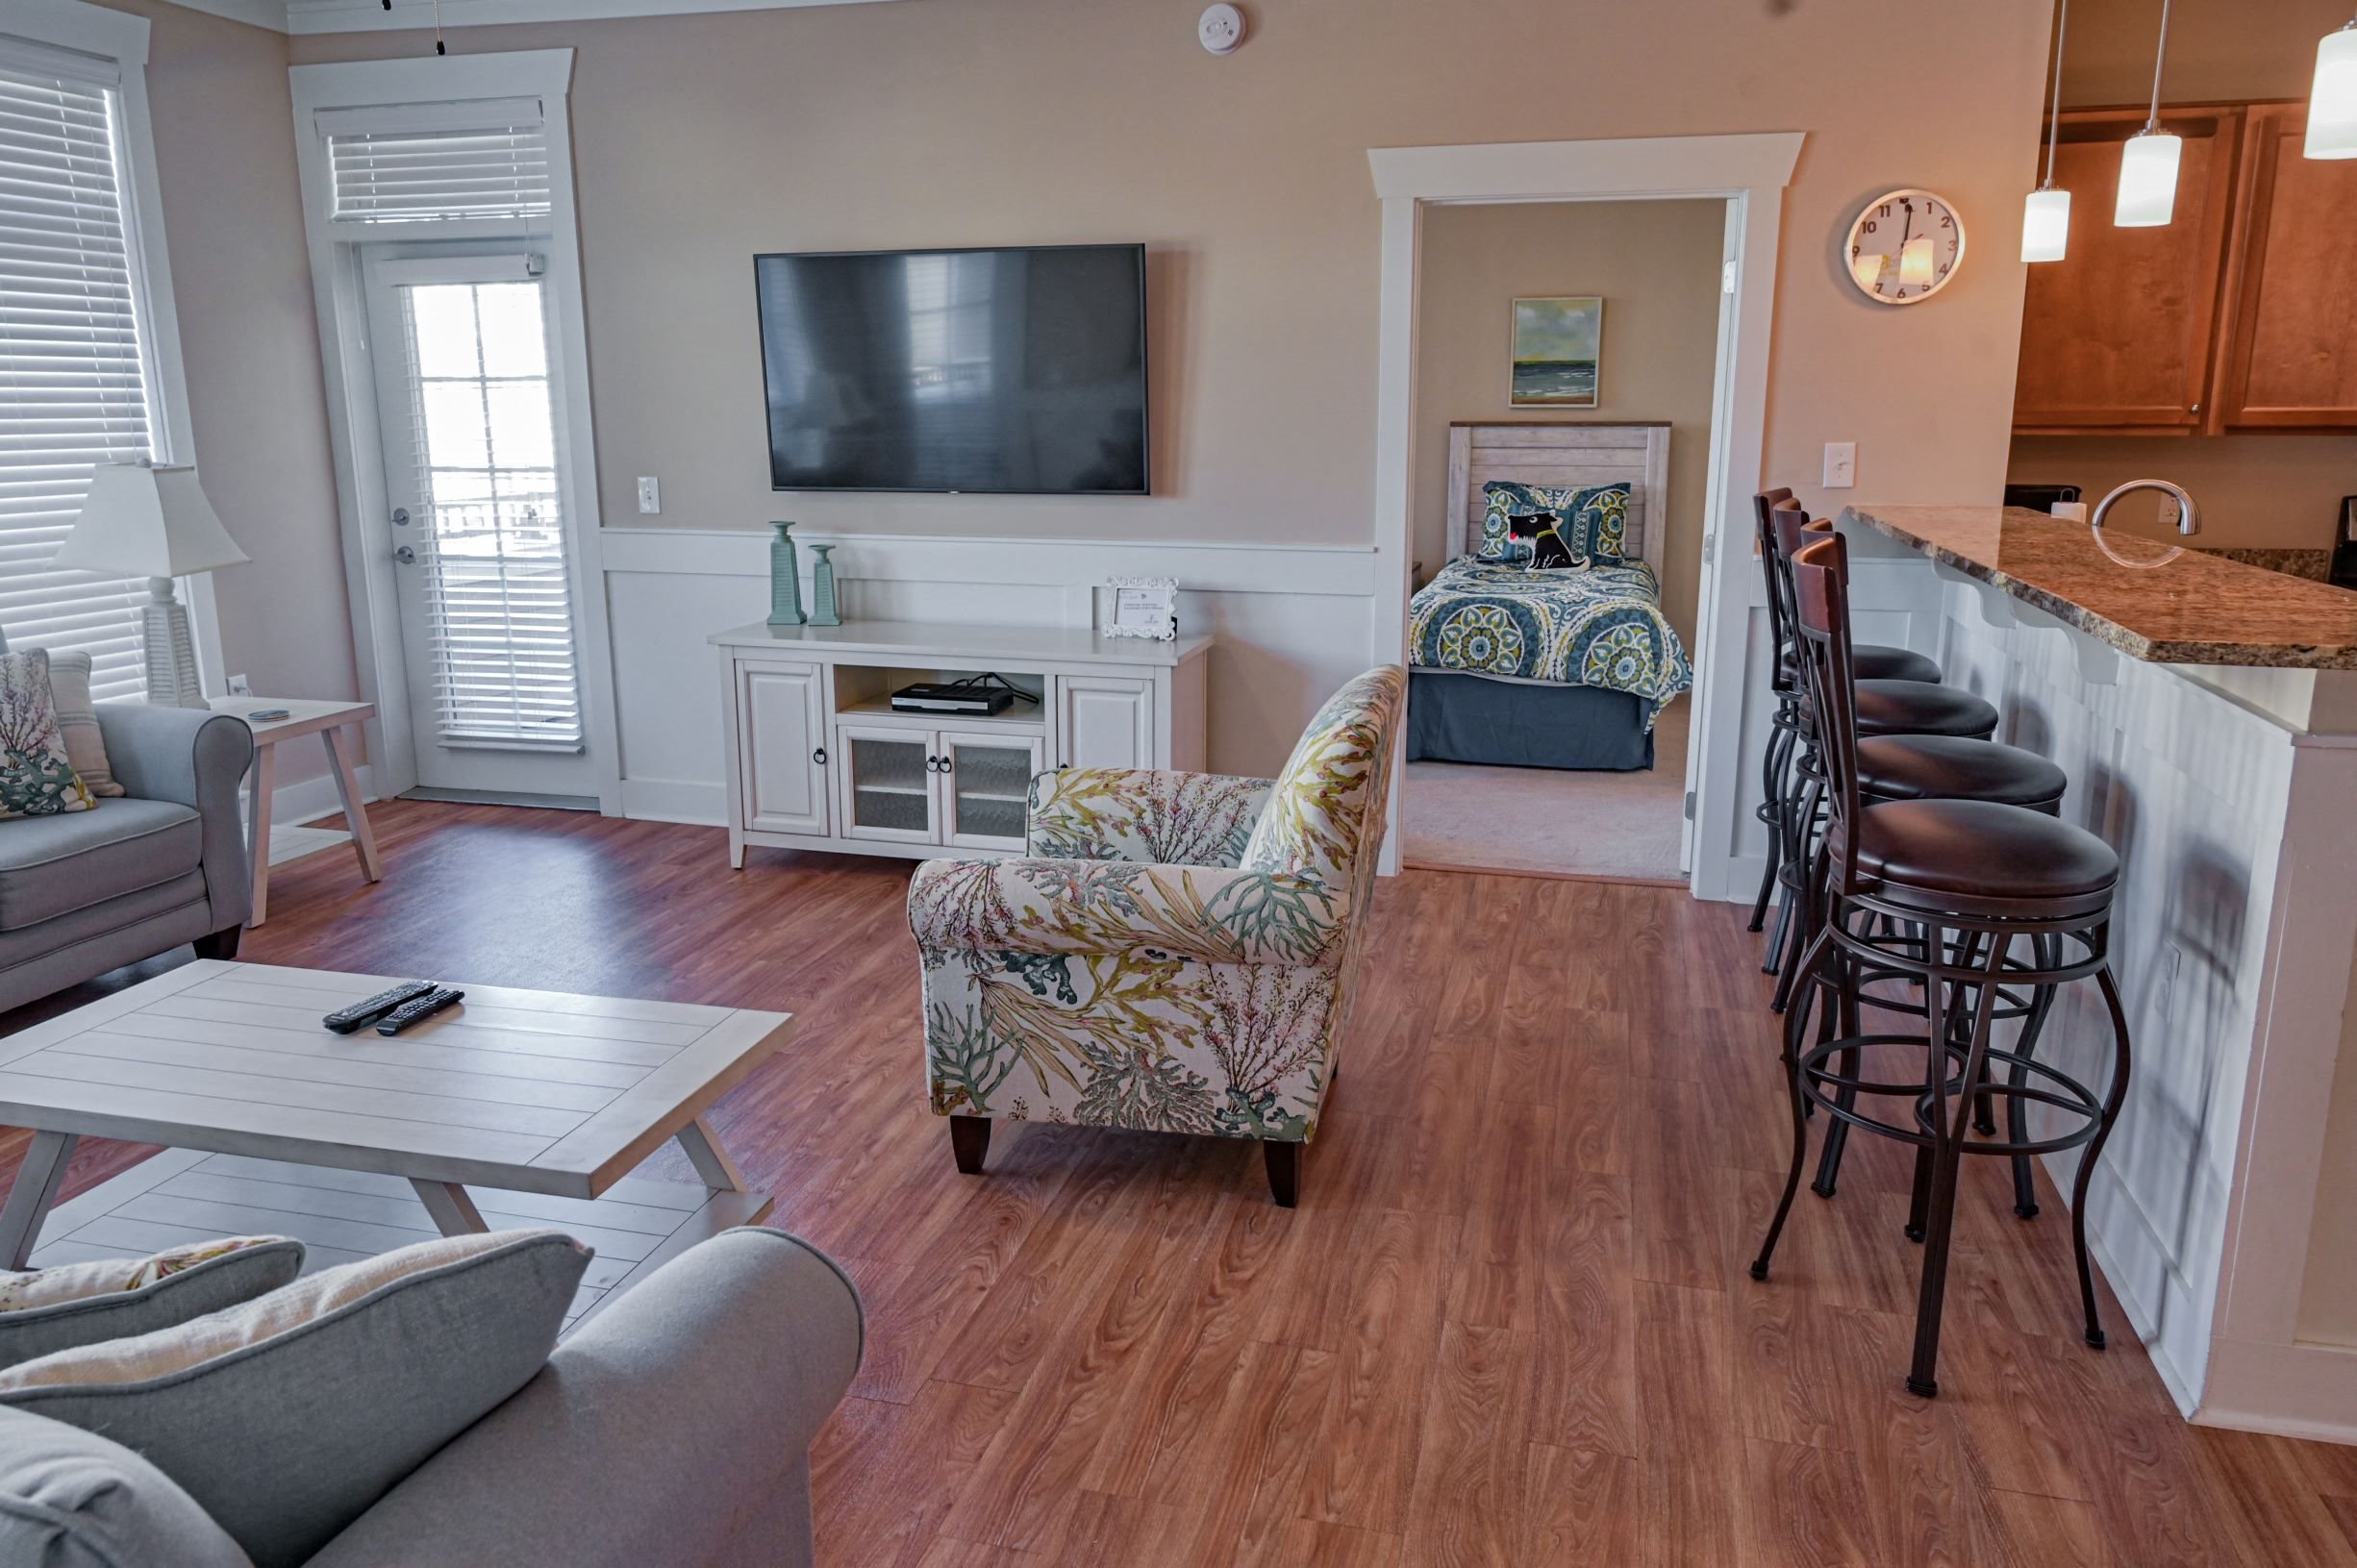 Living Room at Grand View Luxury Apartments in Wilmington, NC